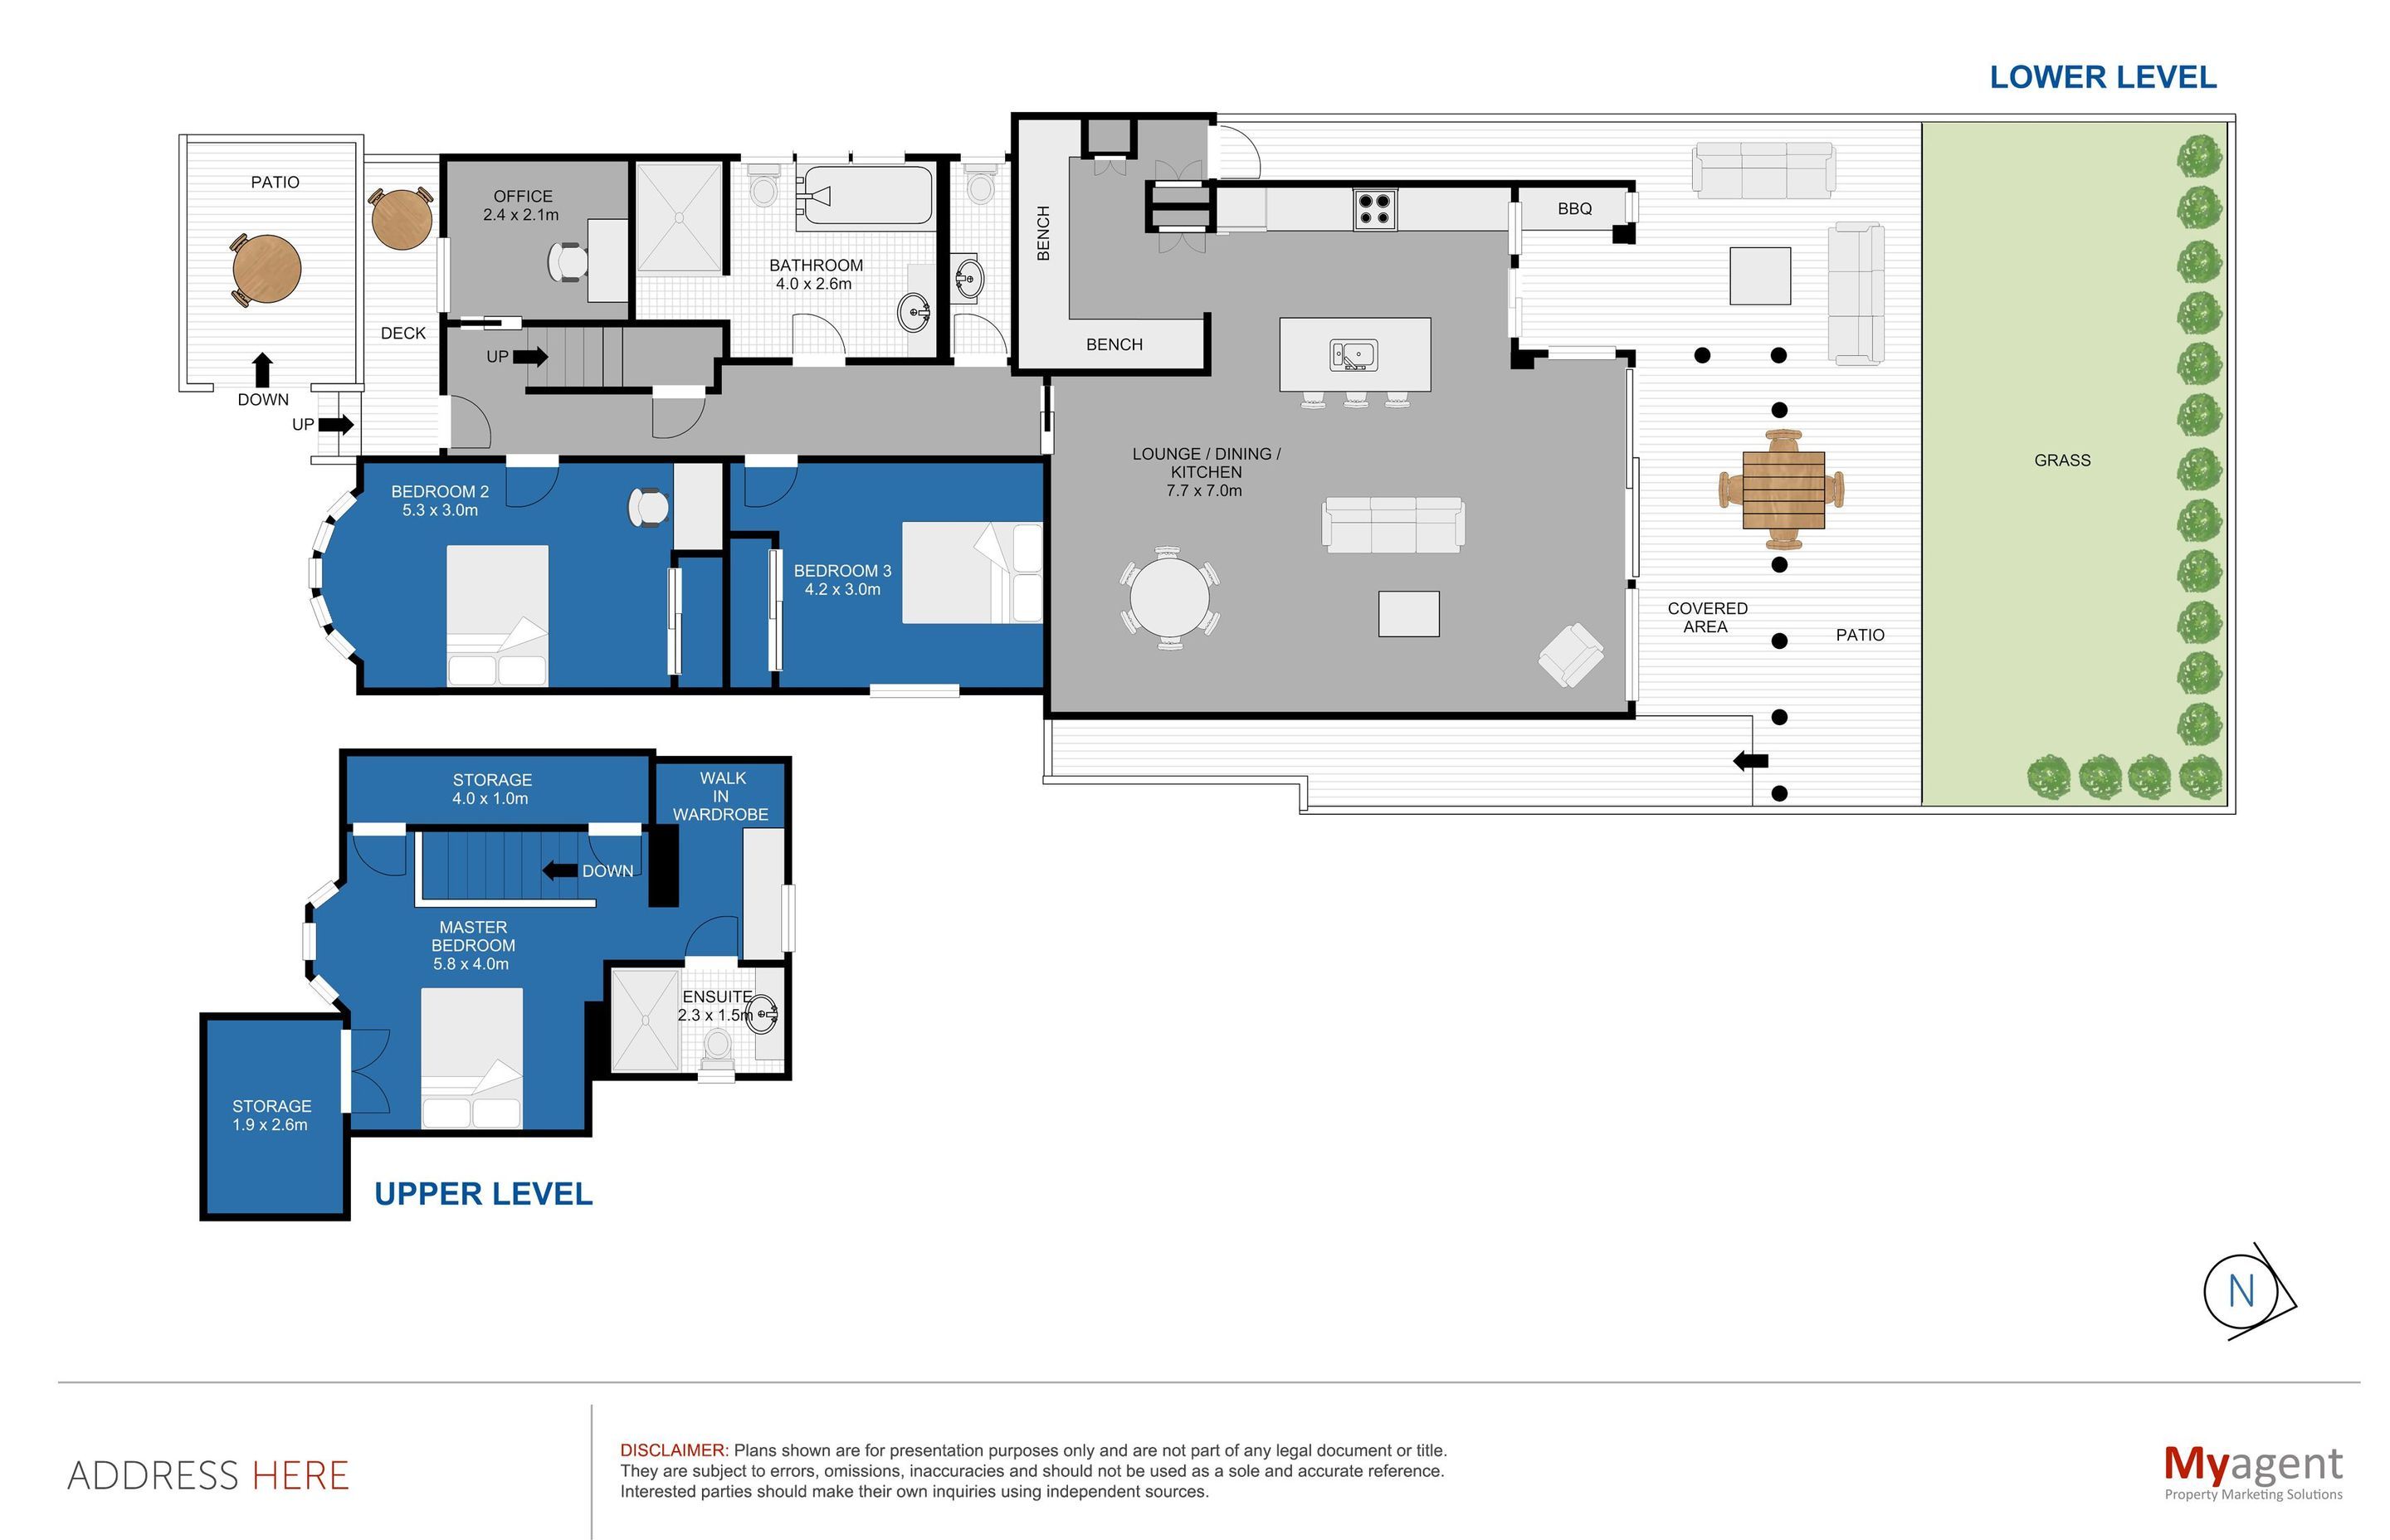 2D FLOOR PLAN - COLOUR TEMPLATE WILL CHANGE DEPENDING ON AGENCY/COMPANY